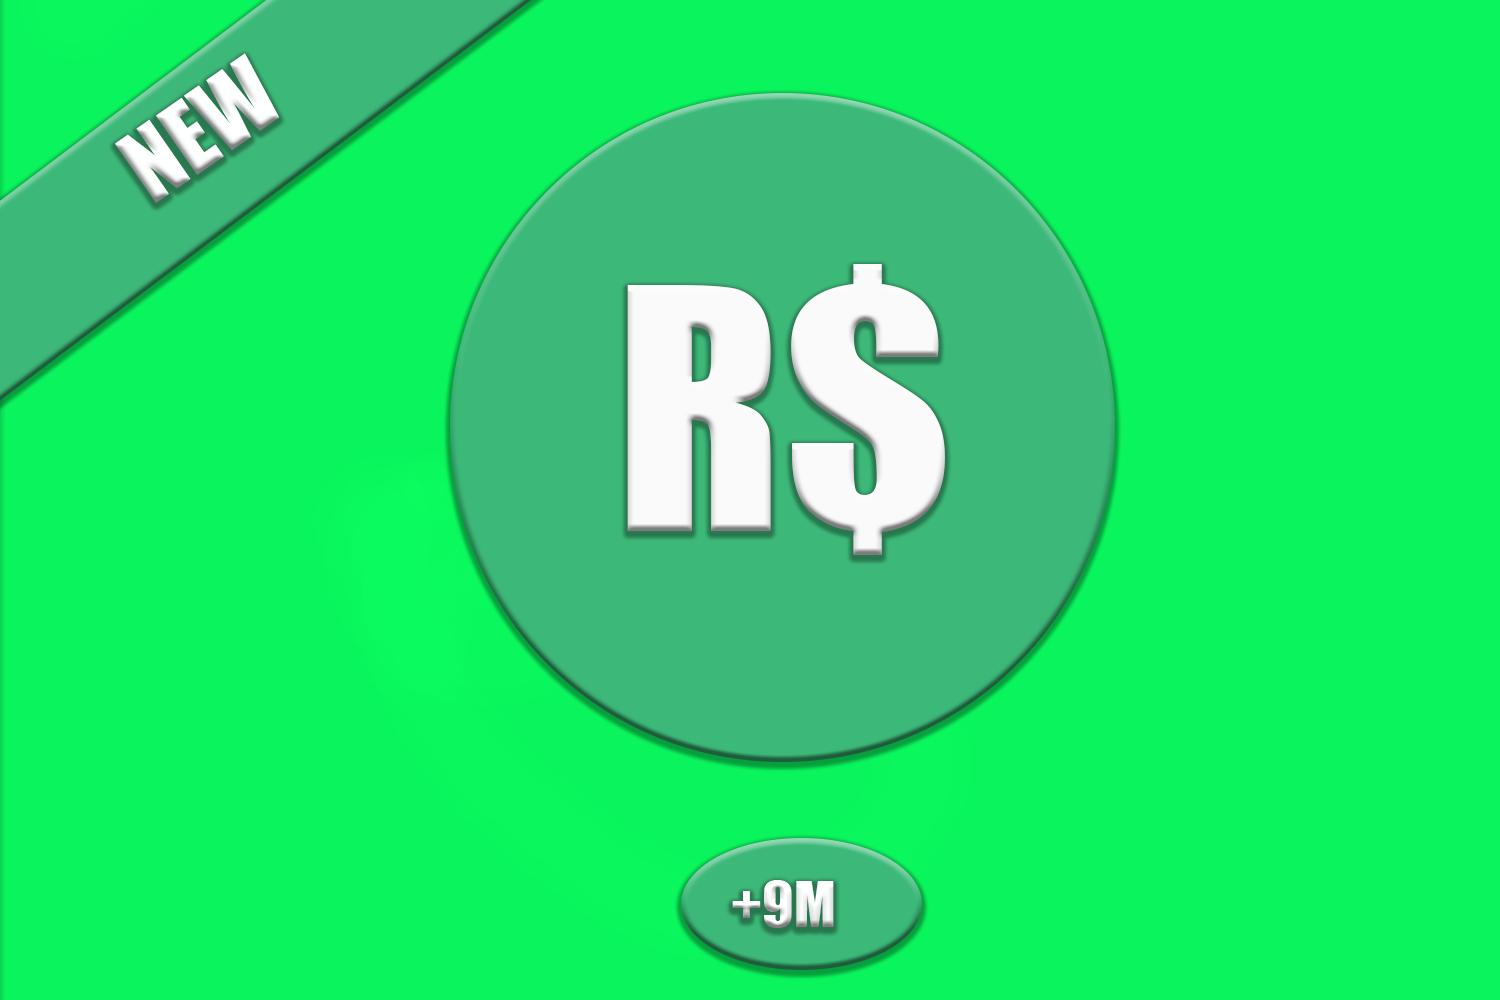 Free Robux Calculator For Robux Counter For Android Apk Download - 9m robux